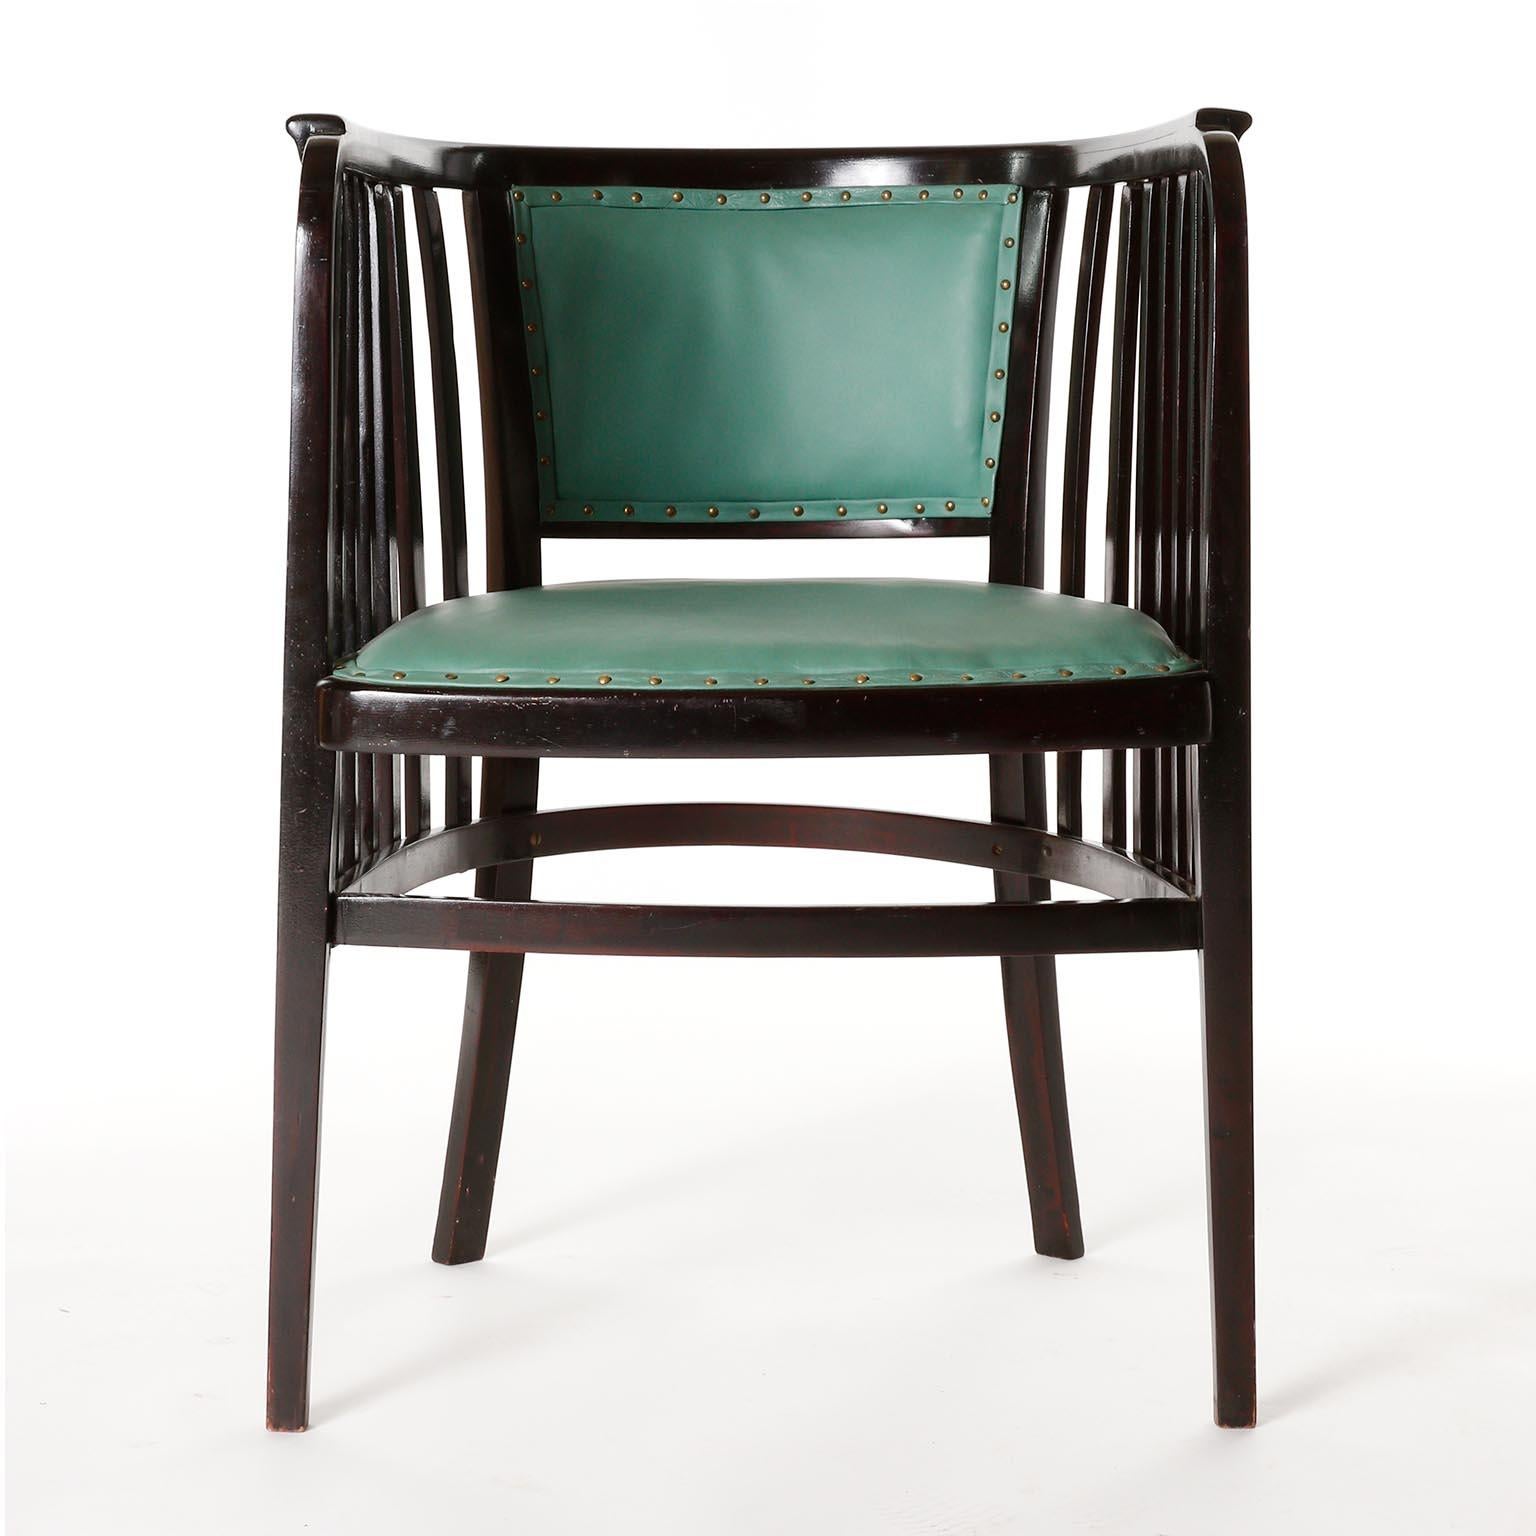 Marcel Kammerer Settee Bench Seat, Thonet Austria, Turquoise Green Leather, 1910 For Sale 4